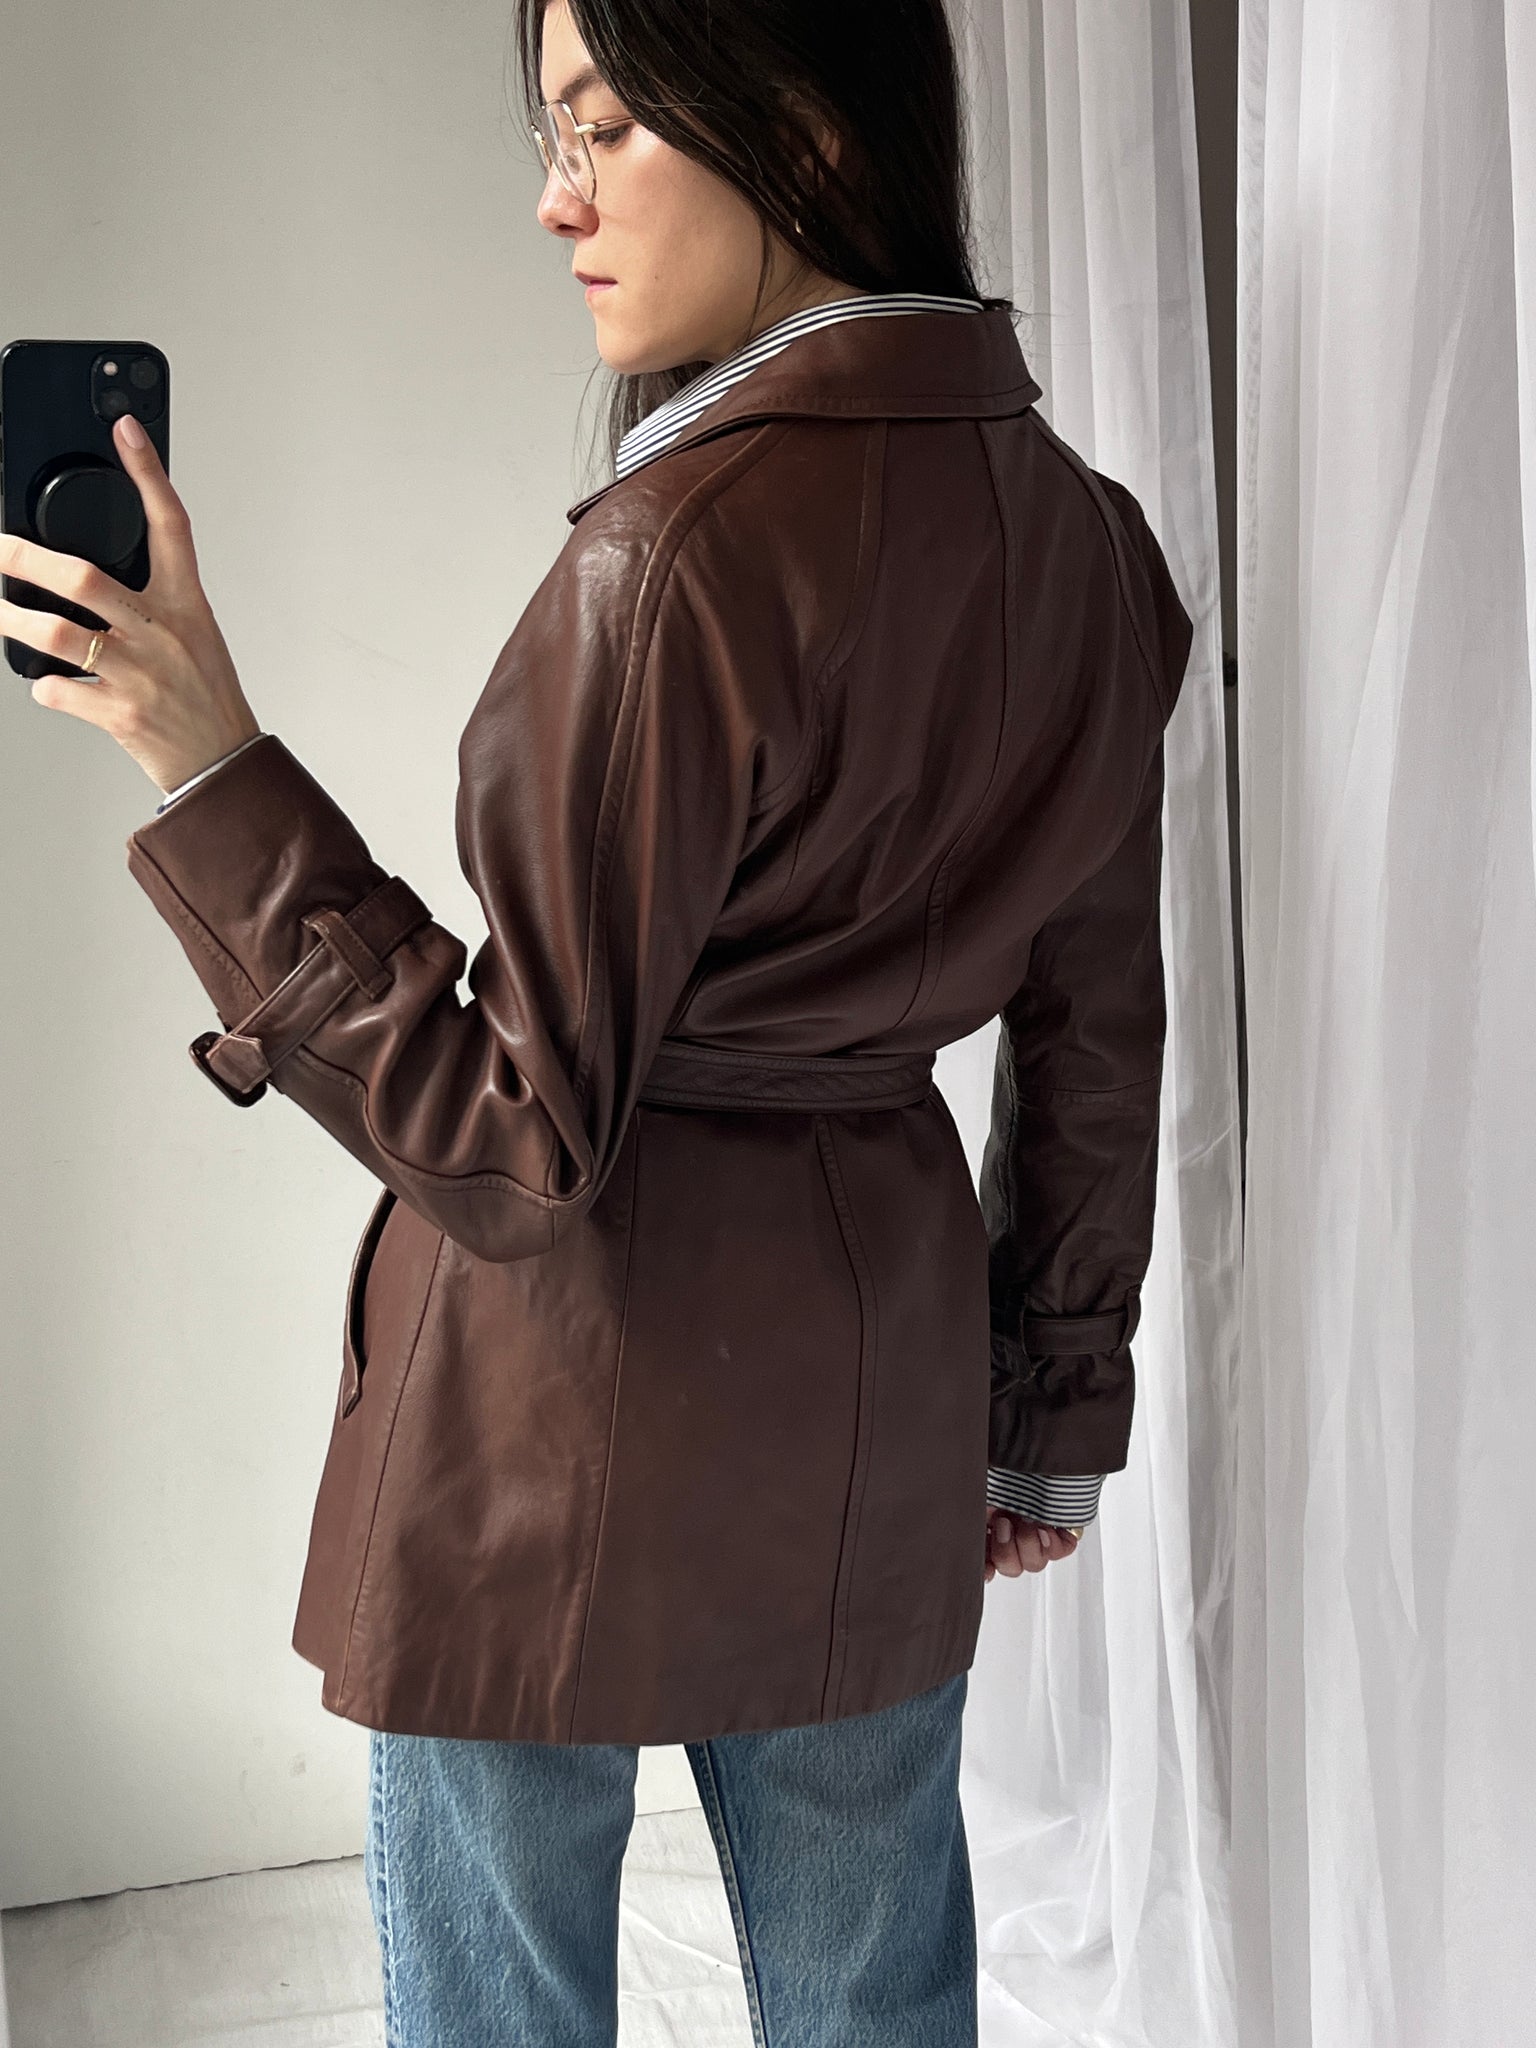 Brooks Brothers Brown Leather Jacket